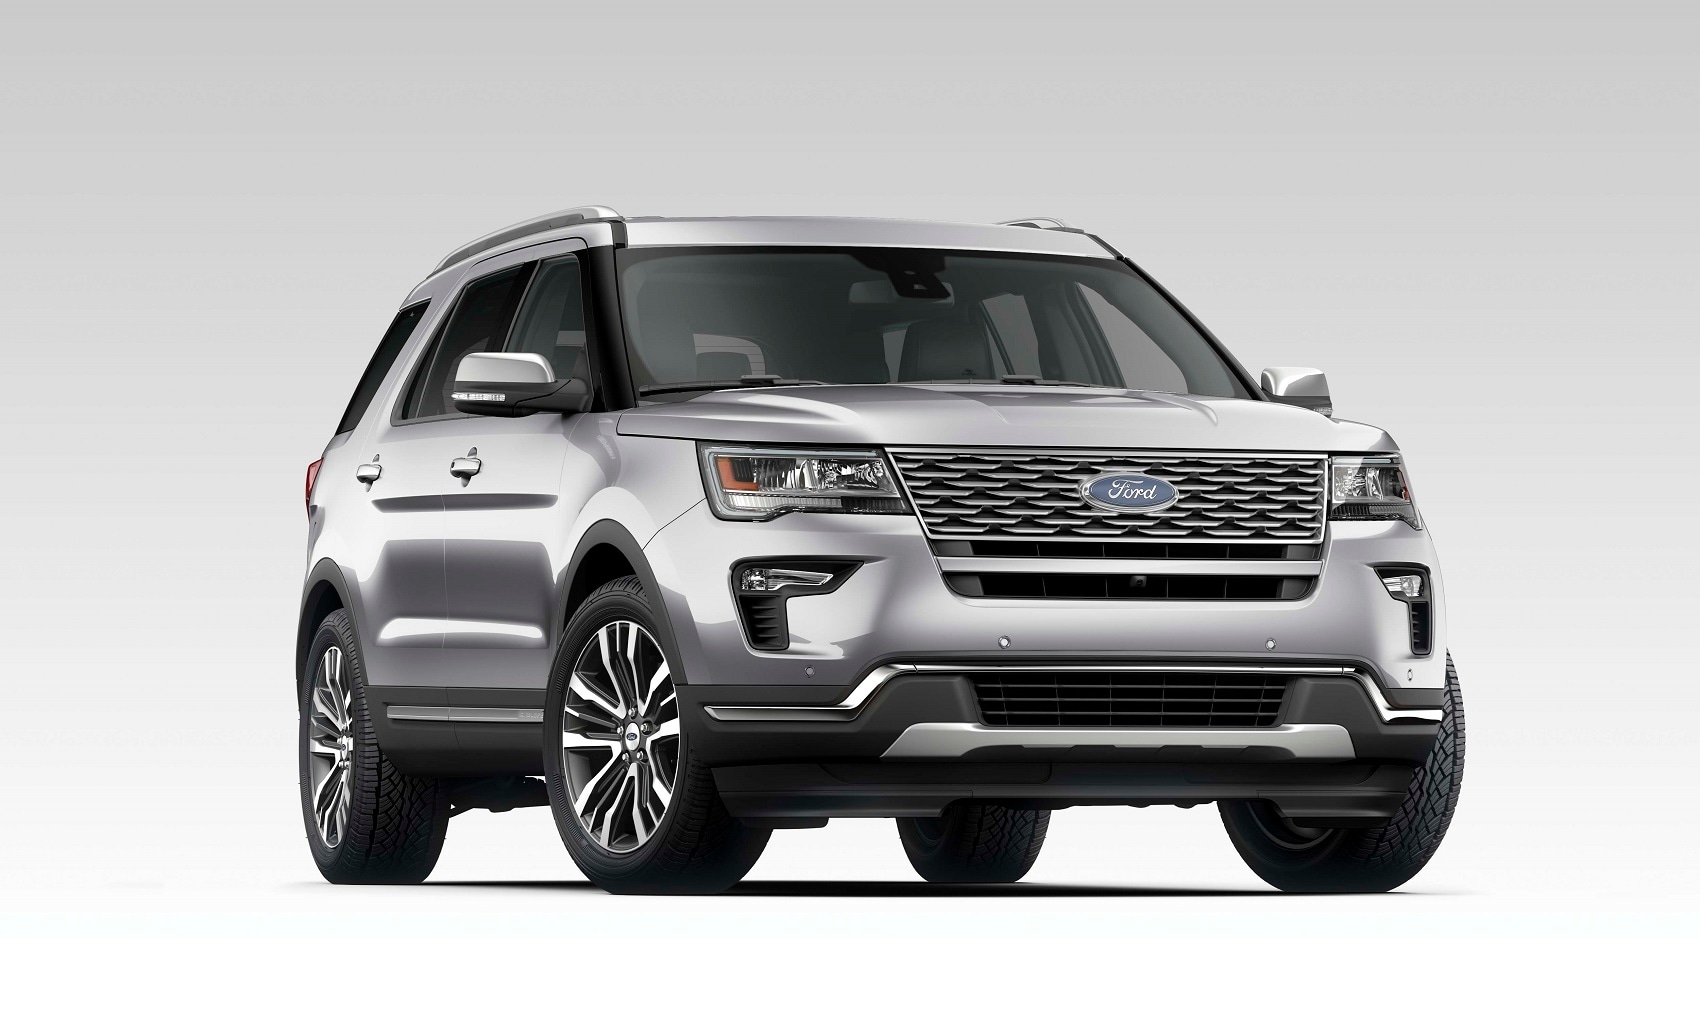 Difference In Ford Explorer Trim Levels